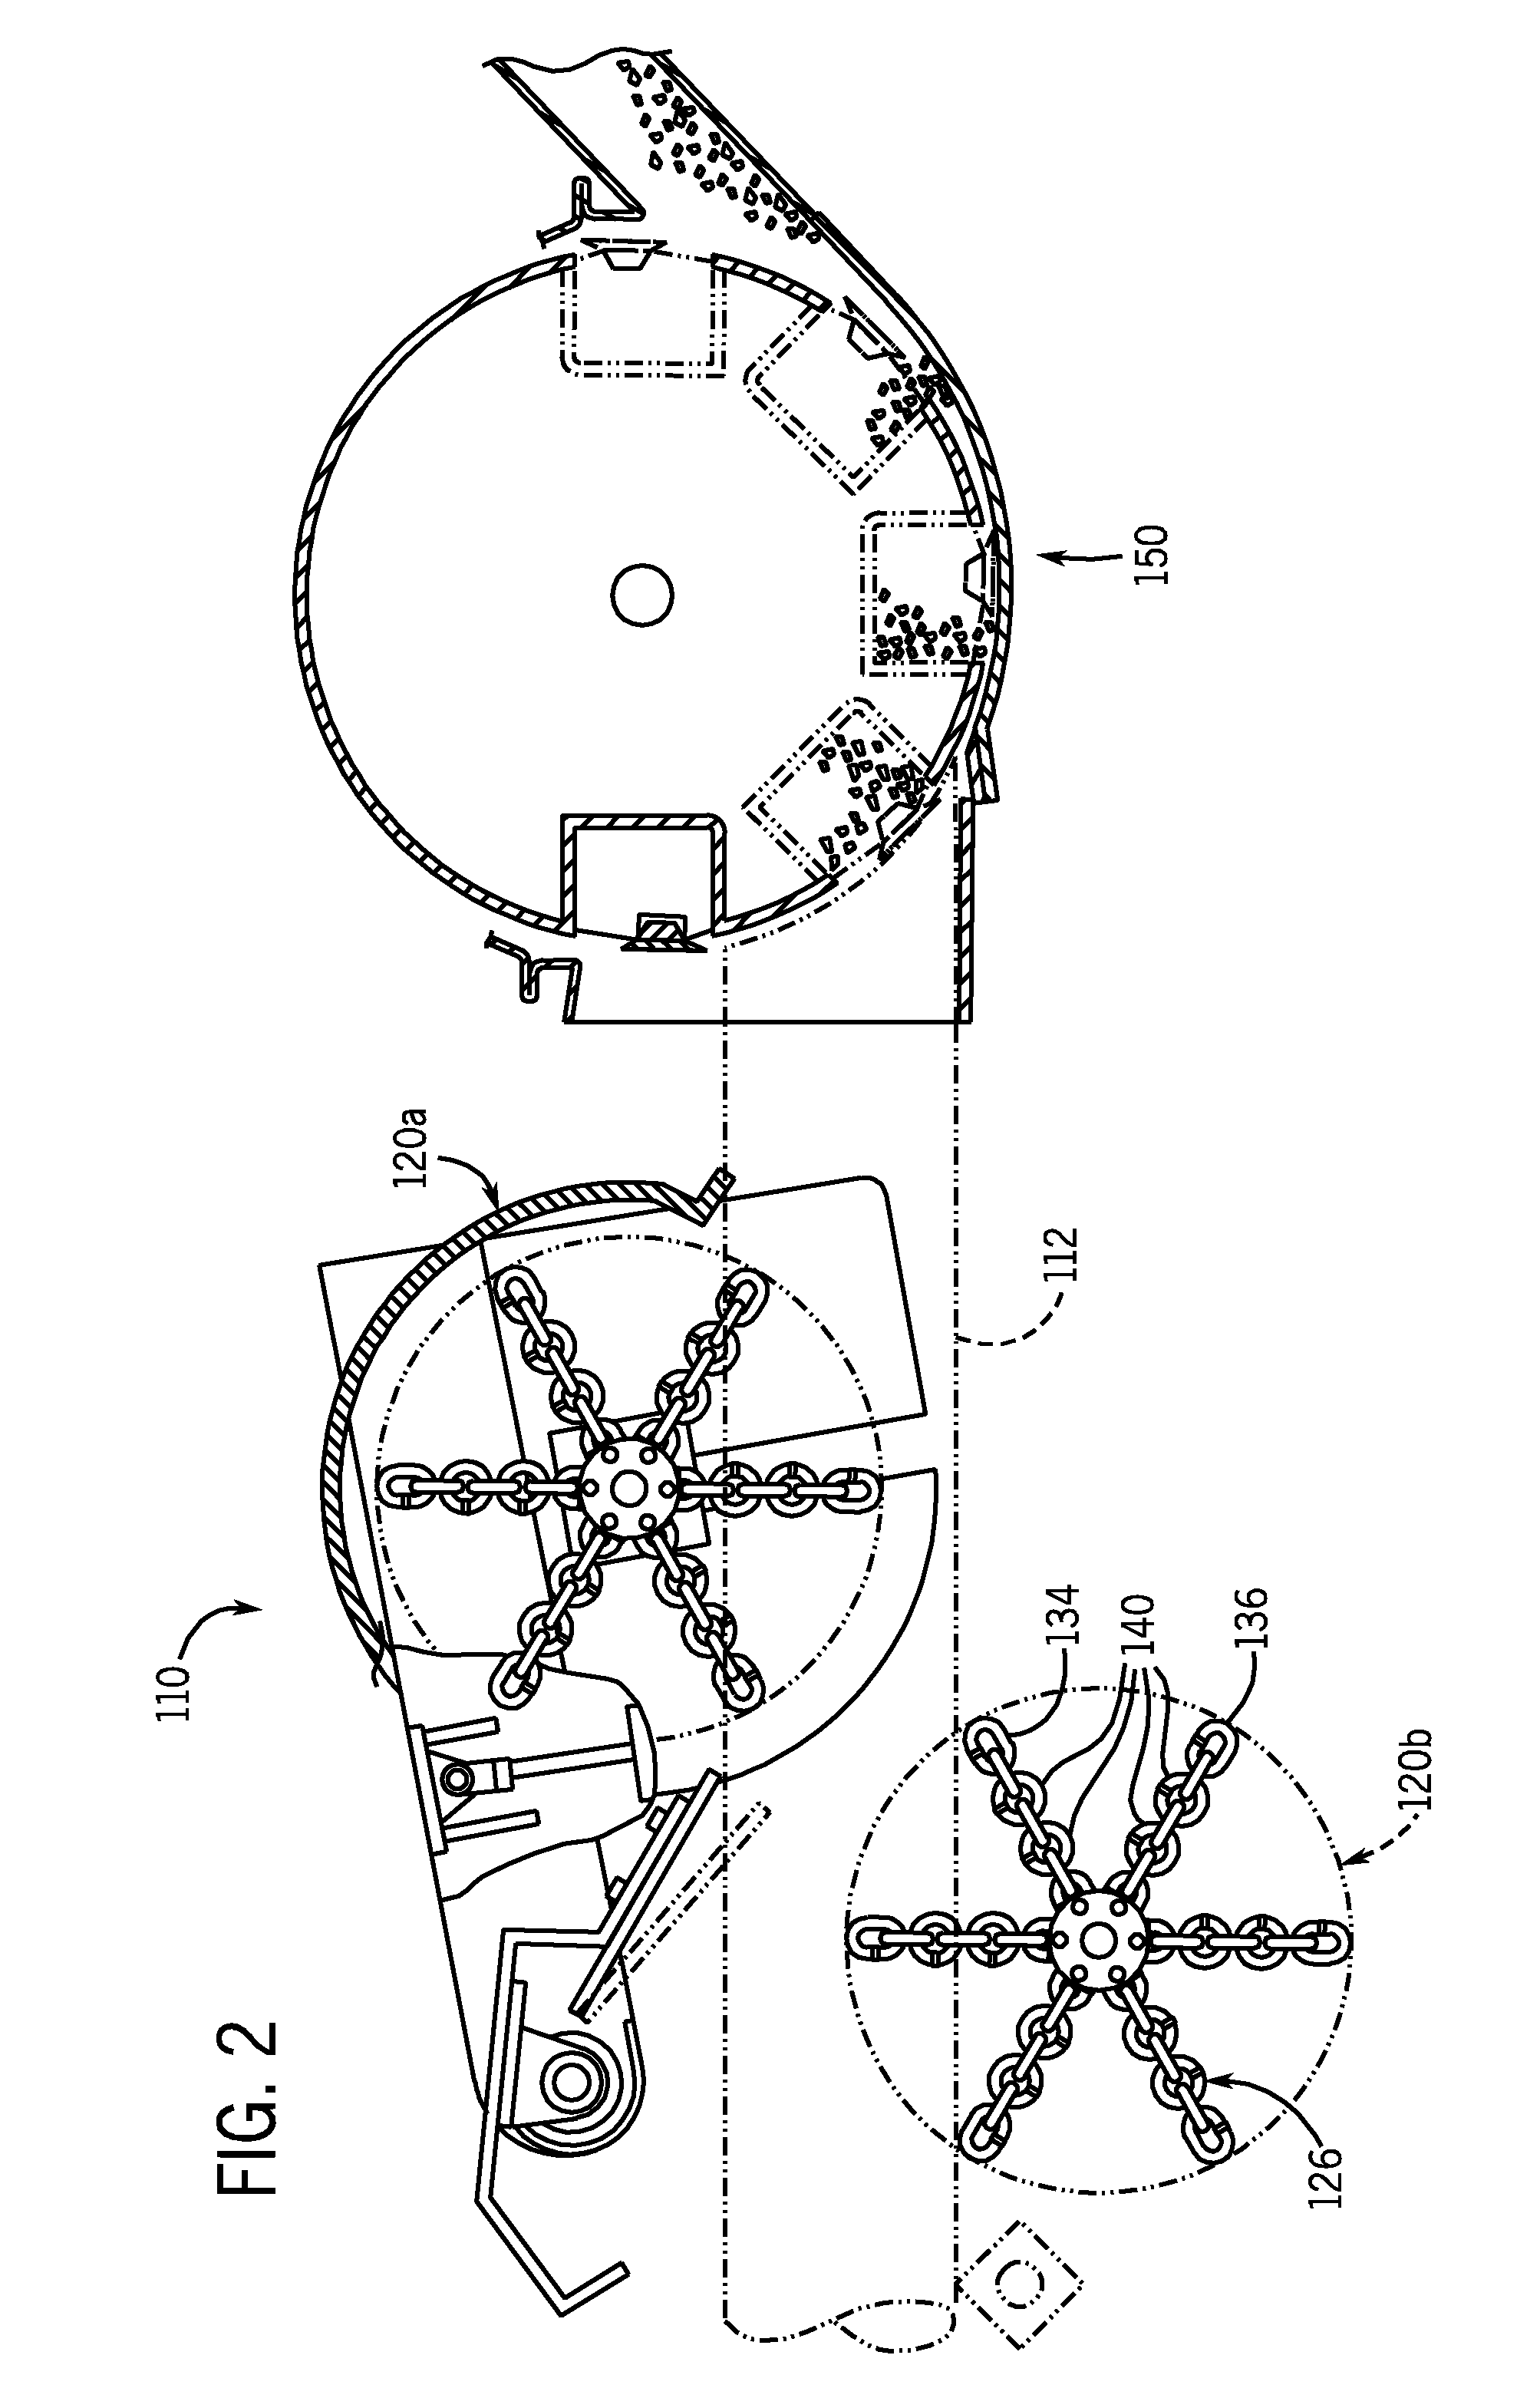 Debarking chain with passing links